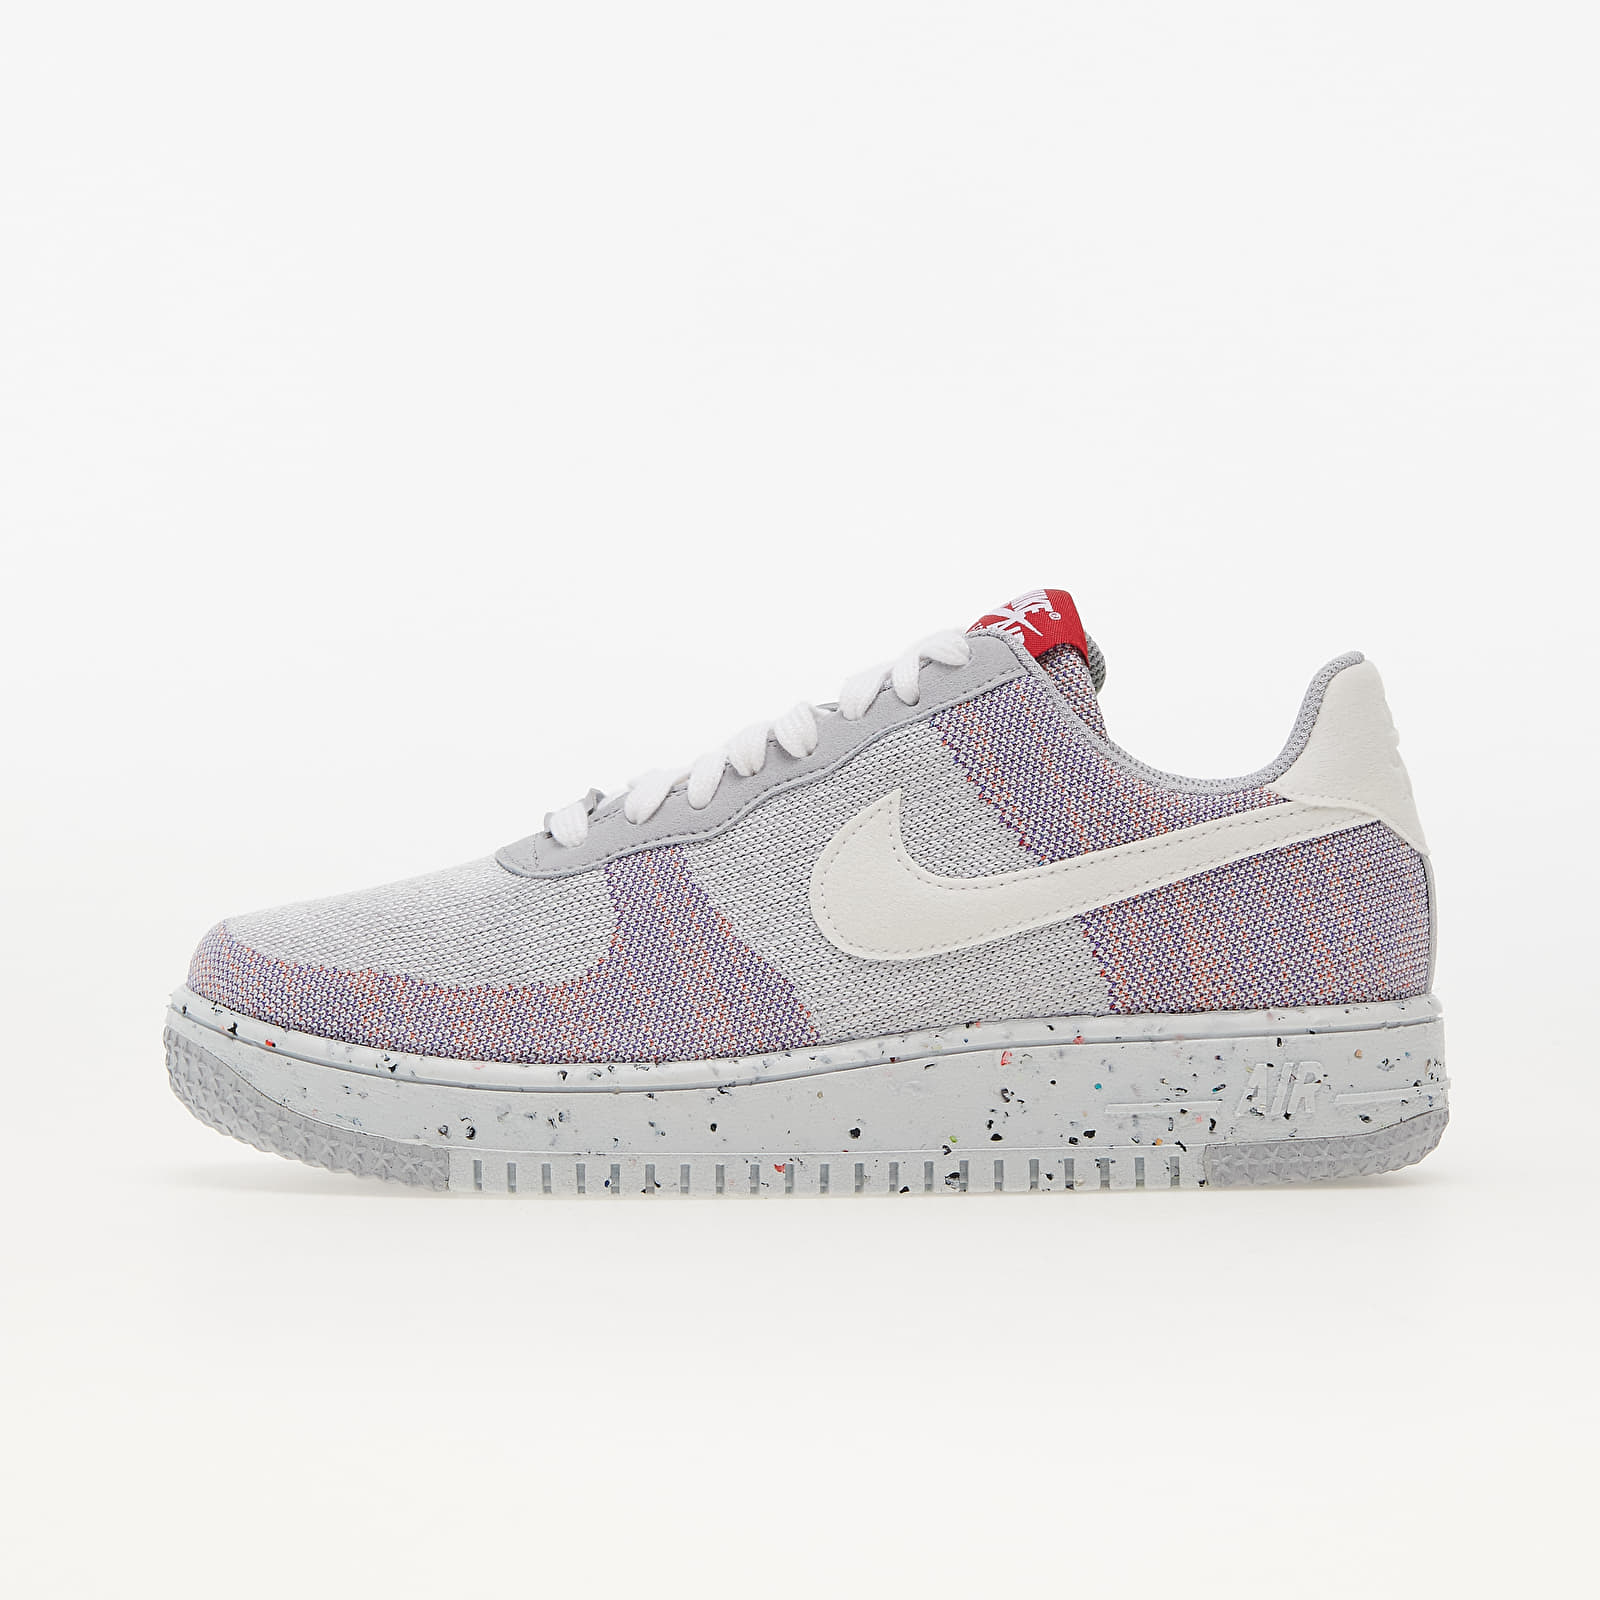 Men's shoes Nike Air Force 1 Crater FlyKnit Wolf Grey/ White-Pure Platinum-Gym Red